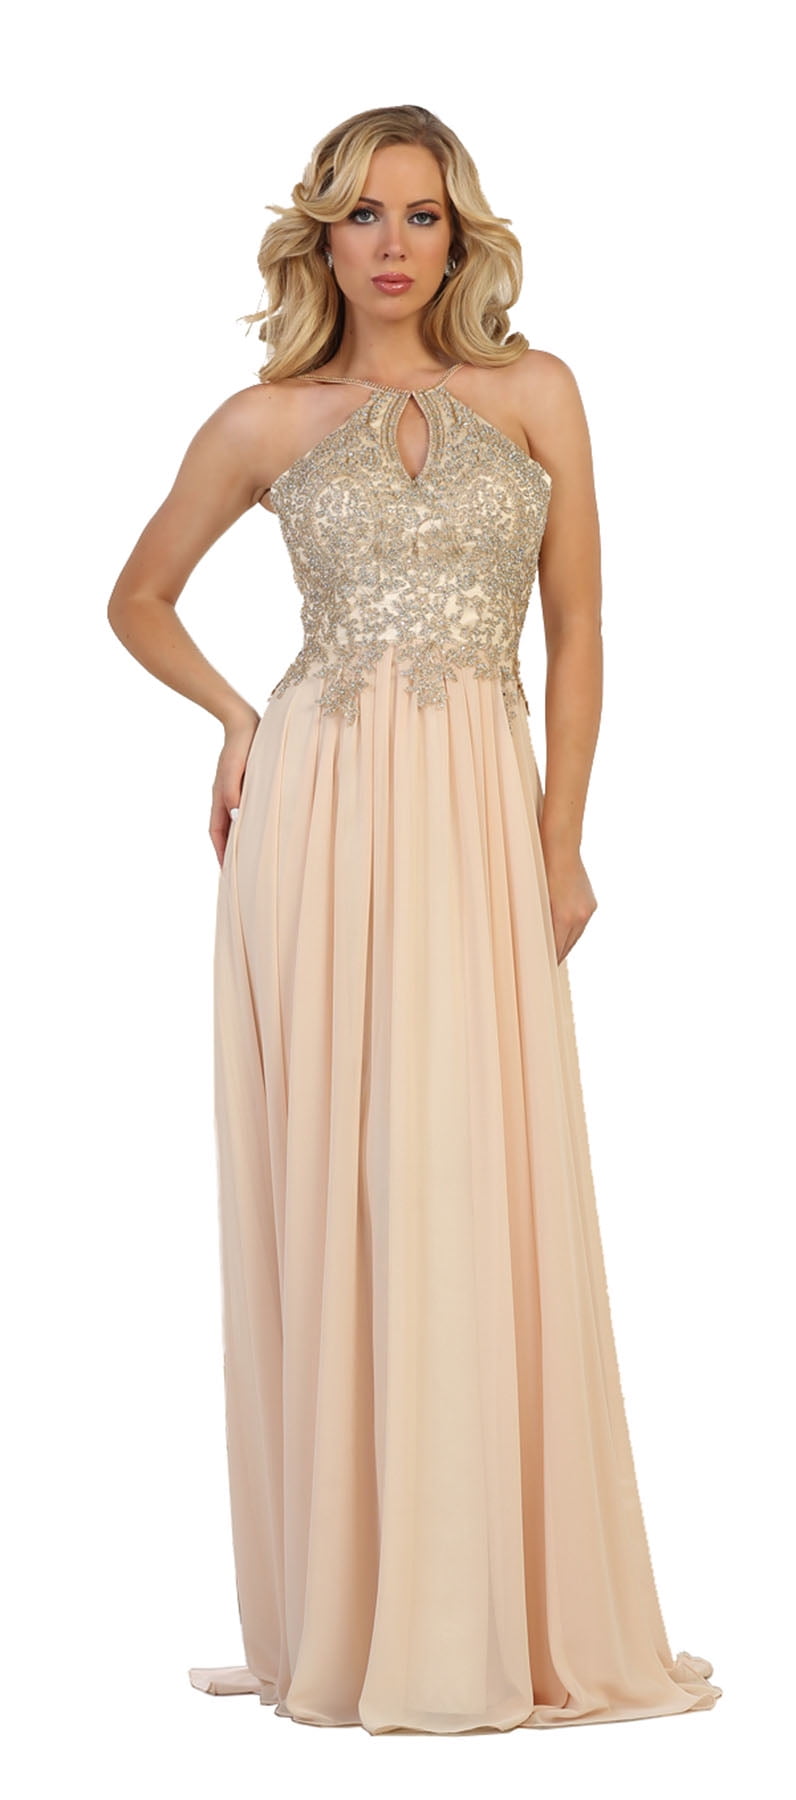 SPECIAL OCCASION PROM EVENING DRESS ...